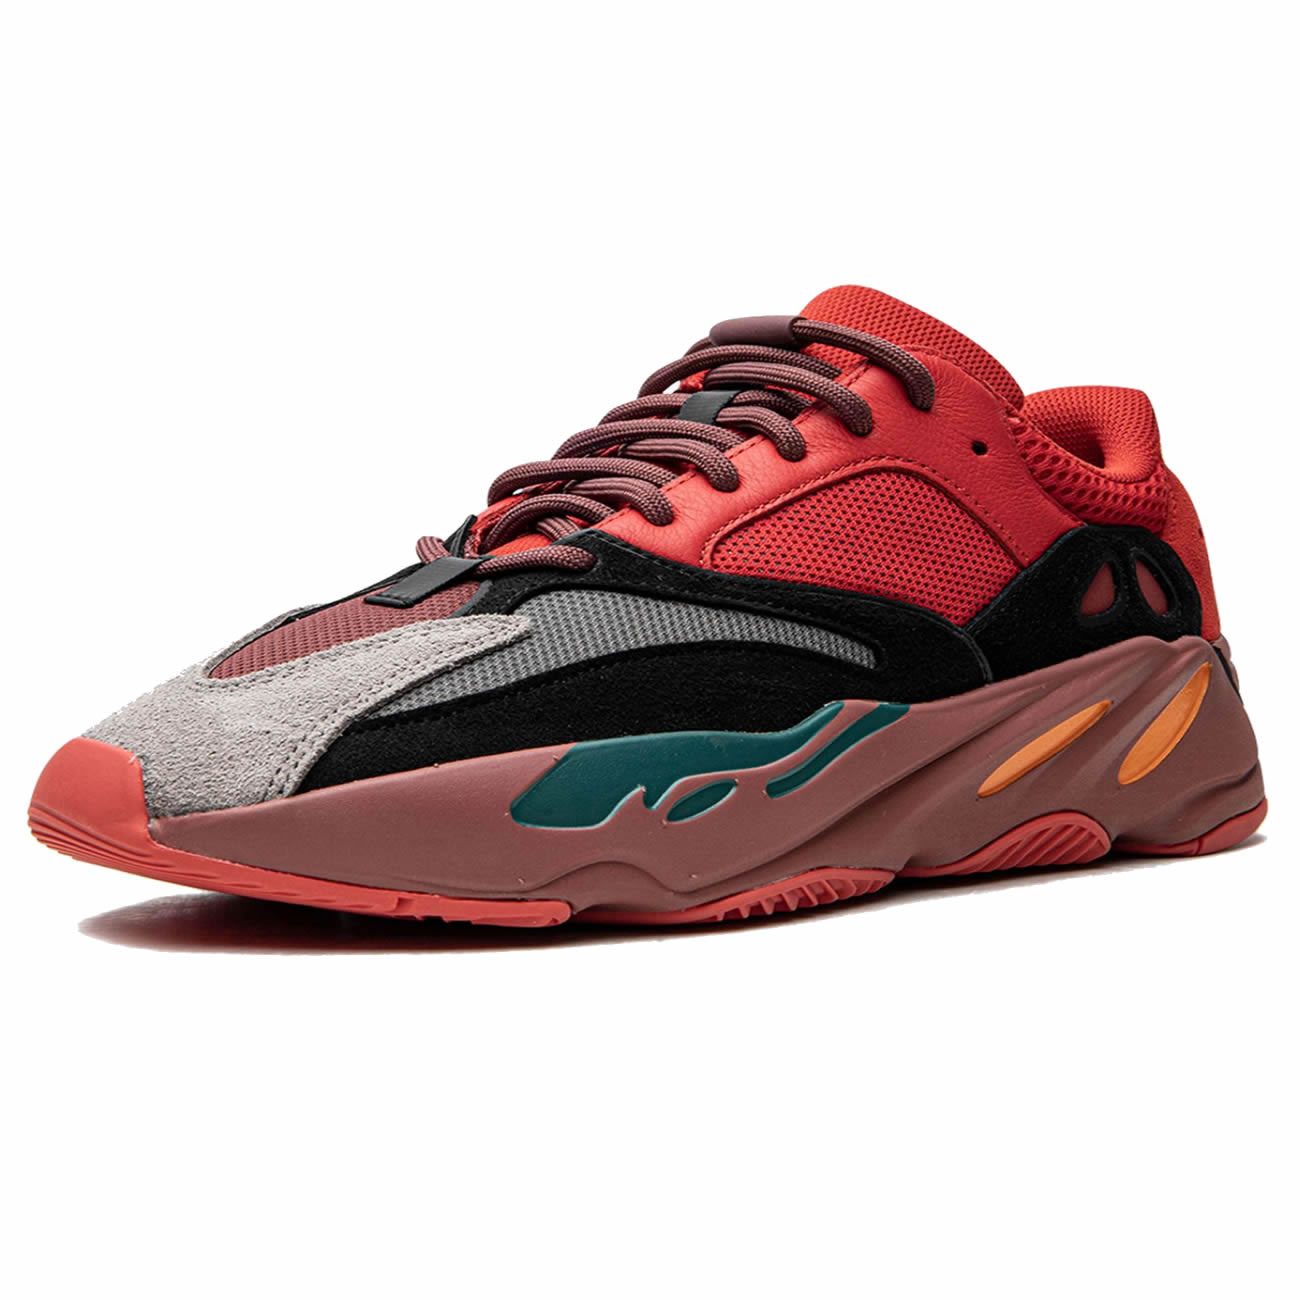 Adidas Yeezy Boost 700 Hi Res Red Hq6979 (2) - newkick.org